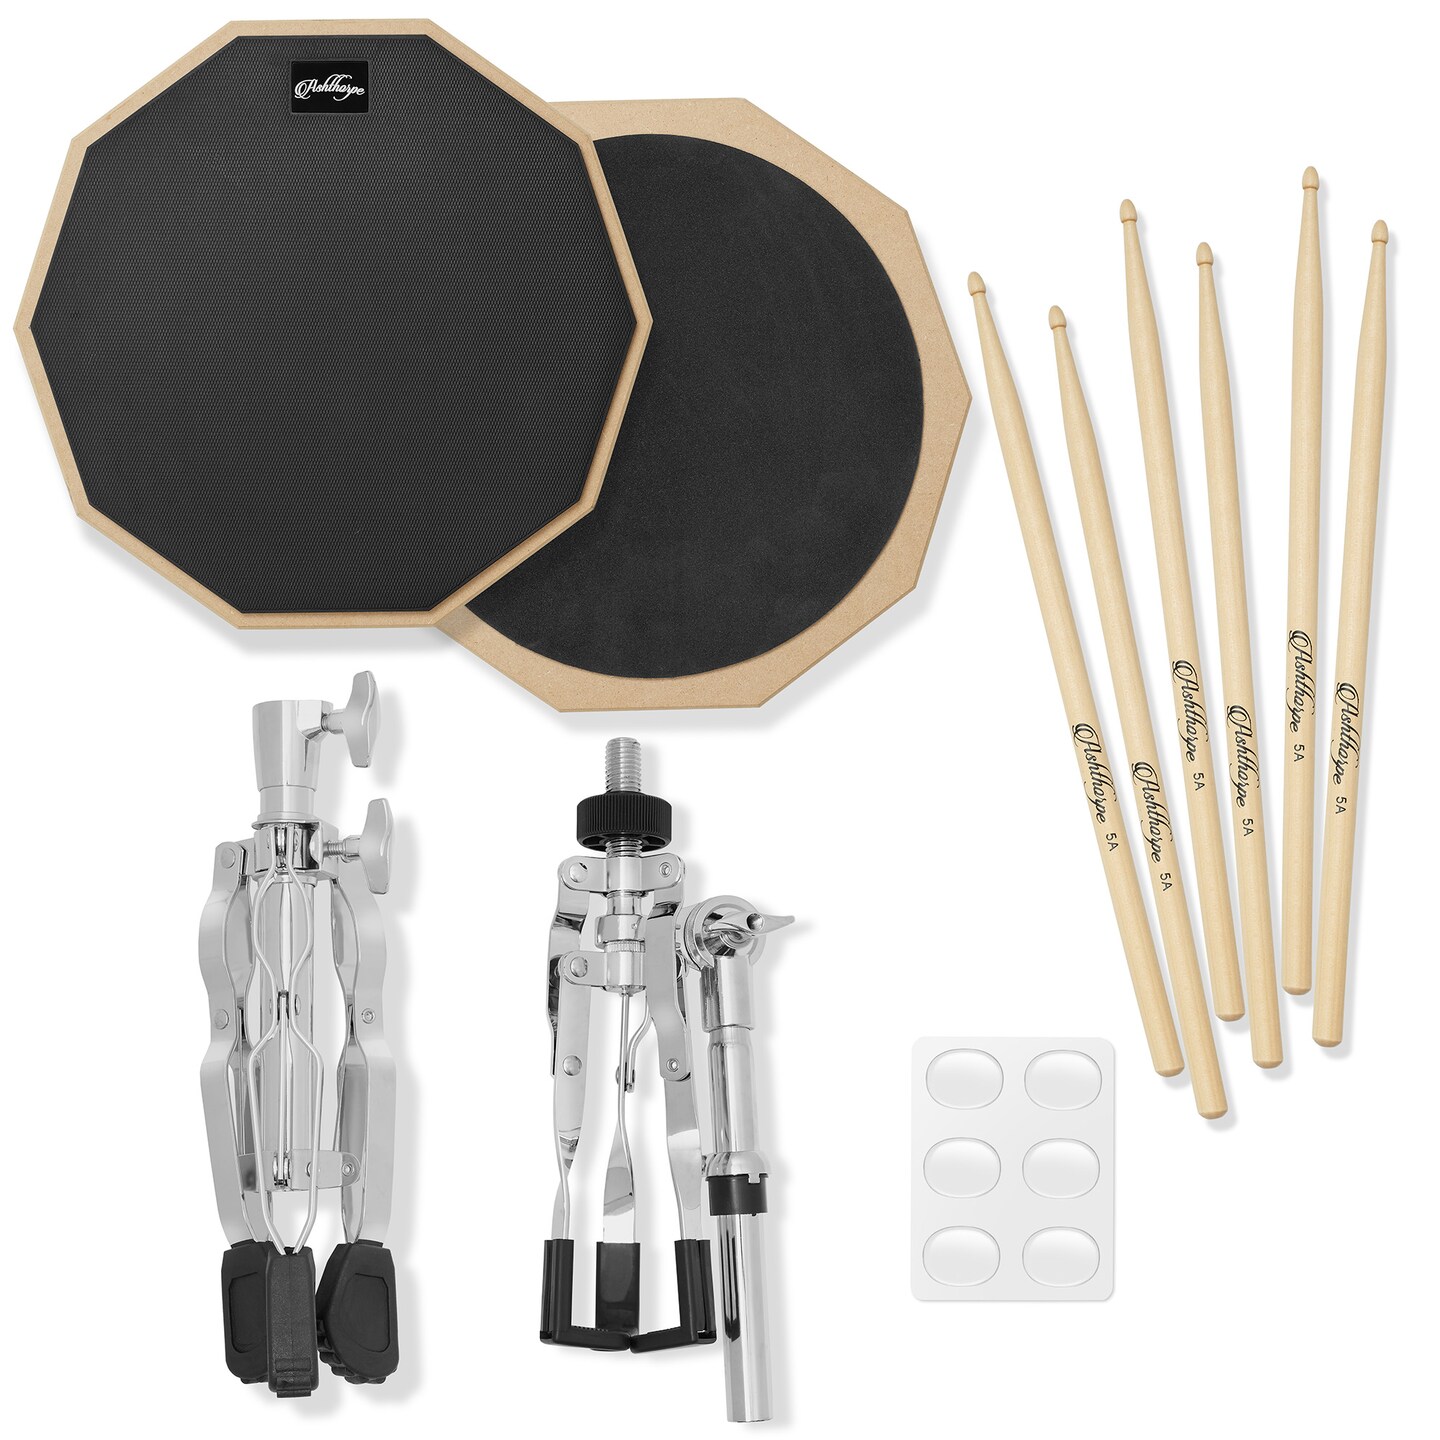 Ashthorpe Drum Practice Pad Set with Snare Stand - 12-Inch Double-Sided Silent Drum Pad Kit Includes Backpack Carrying Bag and Drumsticks